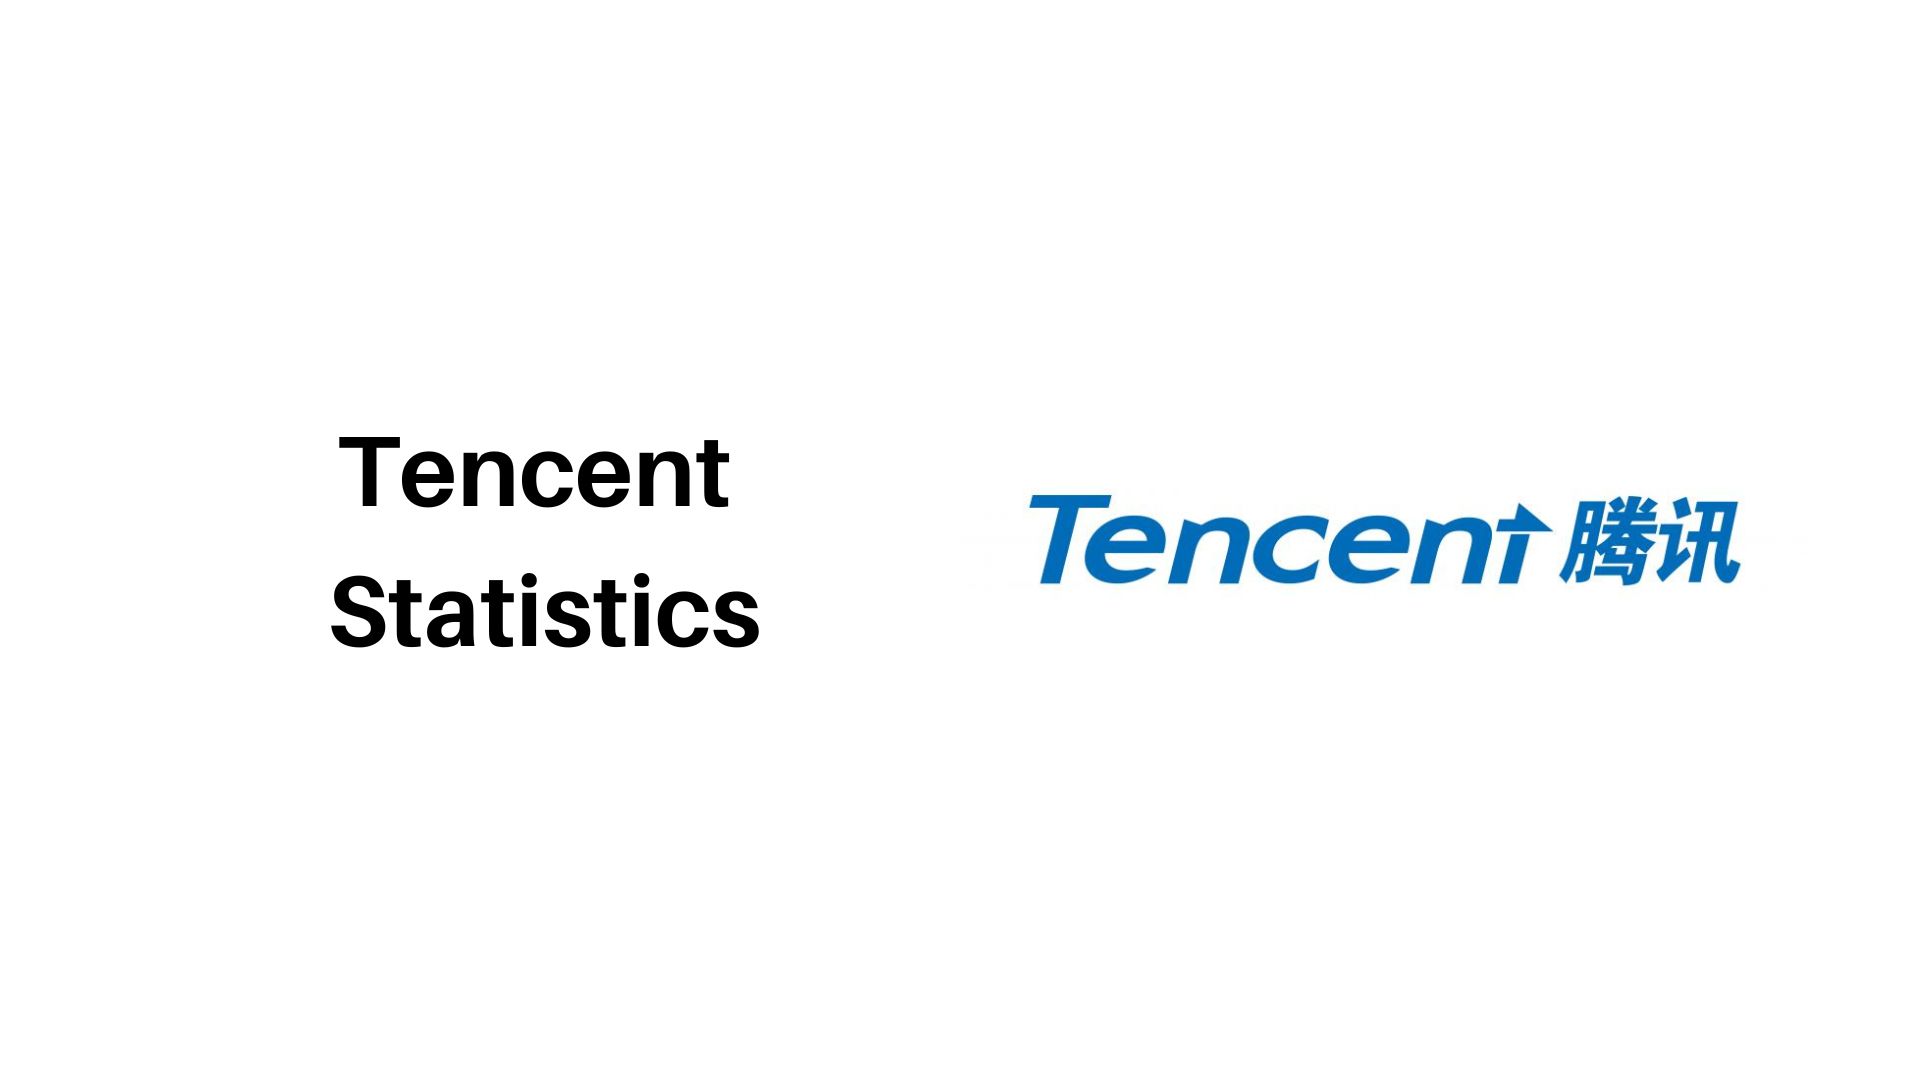 Tencent Statistics By Apps, Revenue, Technology, Active Users, Business Insights, WeChat Users, Games Revenue, OTT Video Services, Platforms, Online Music